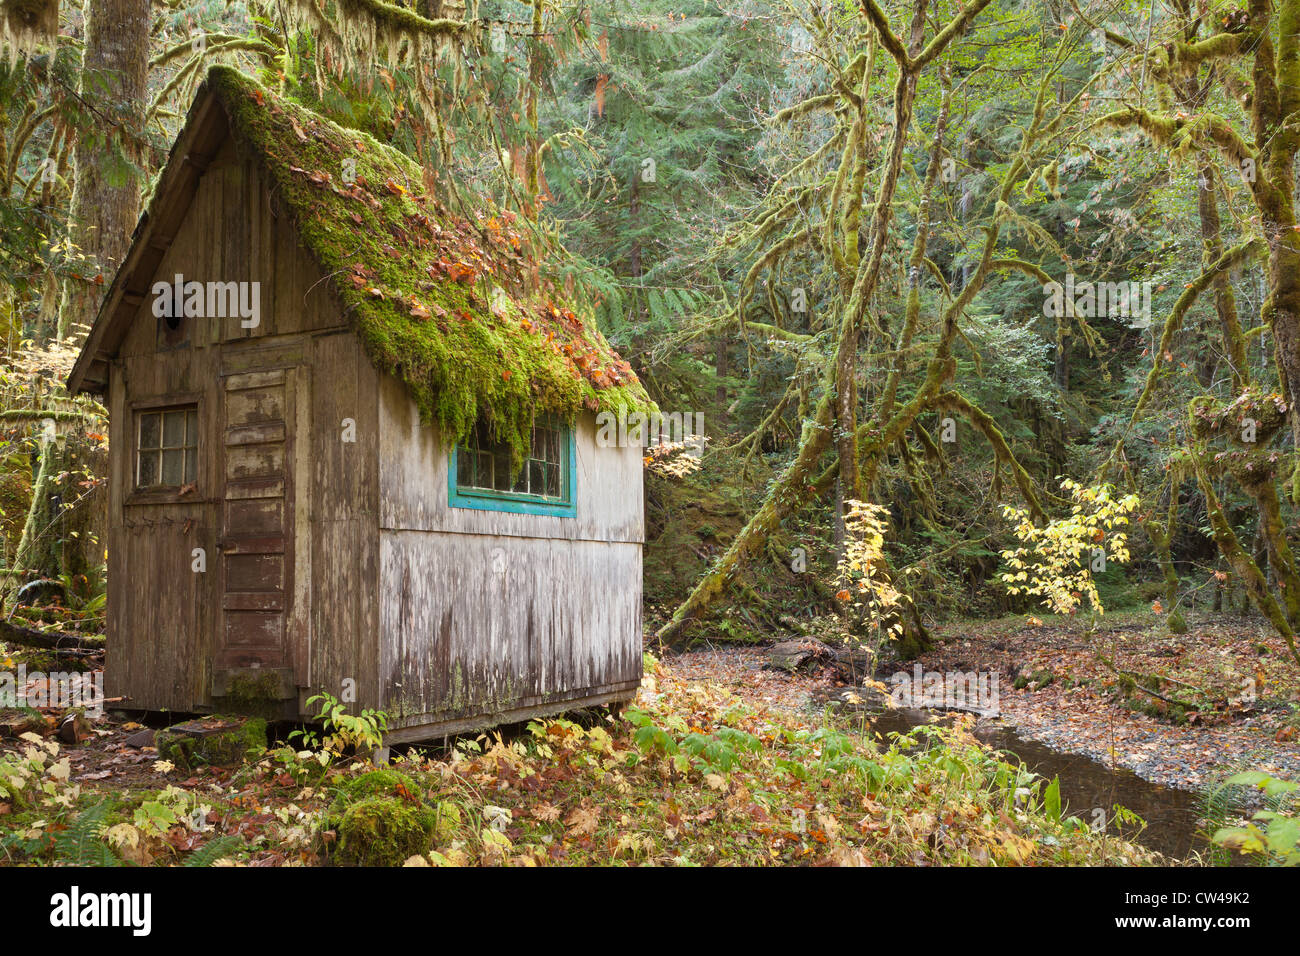 Old cabin in a forest, Olympic National Park, Washington State, USA Stock Photo